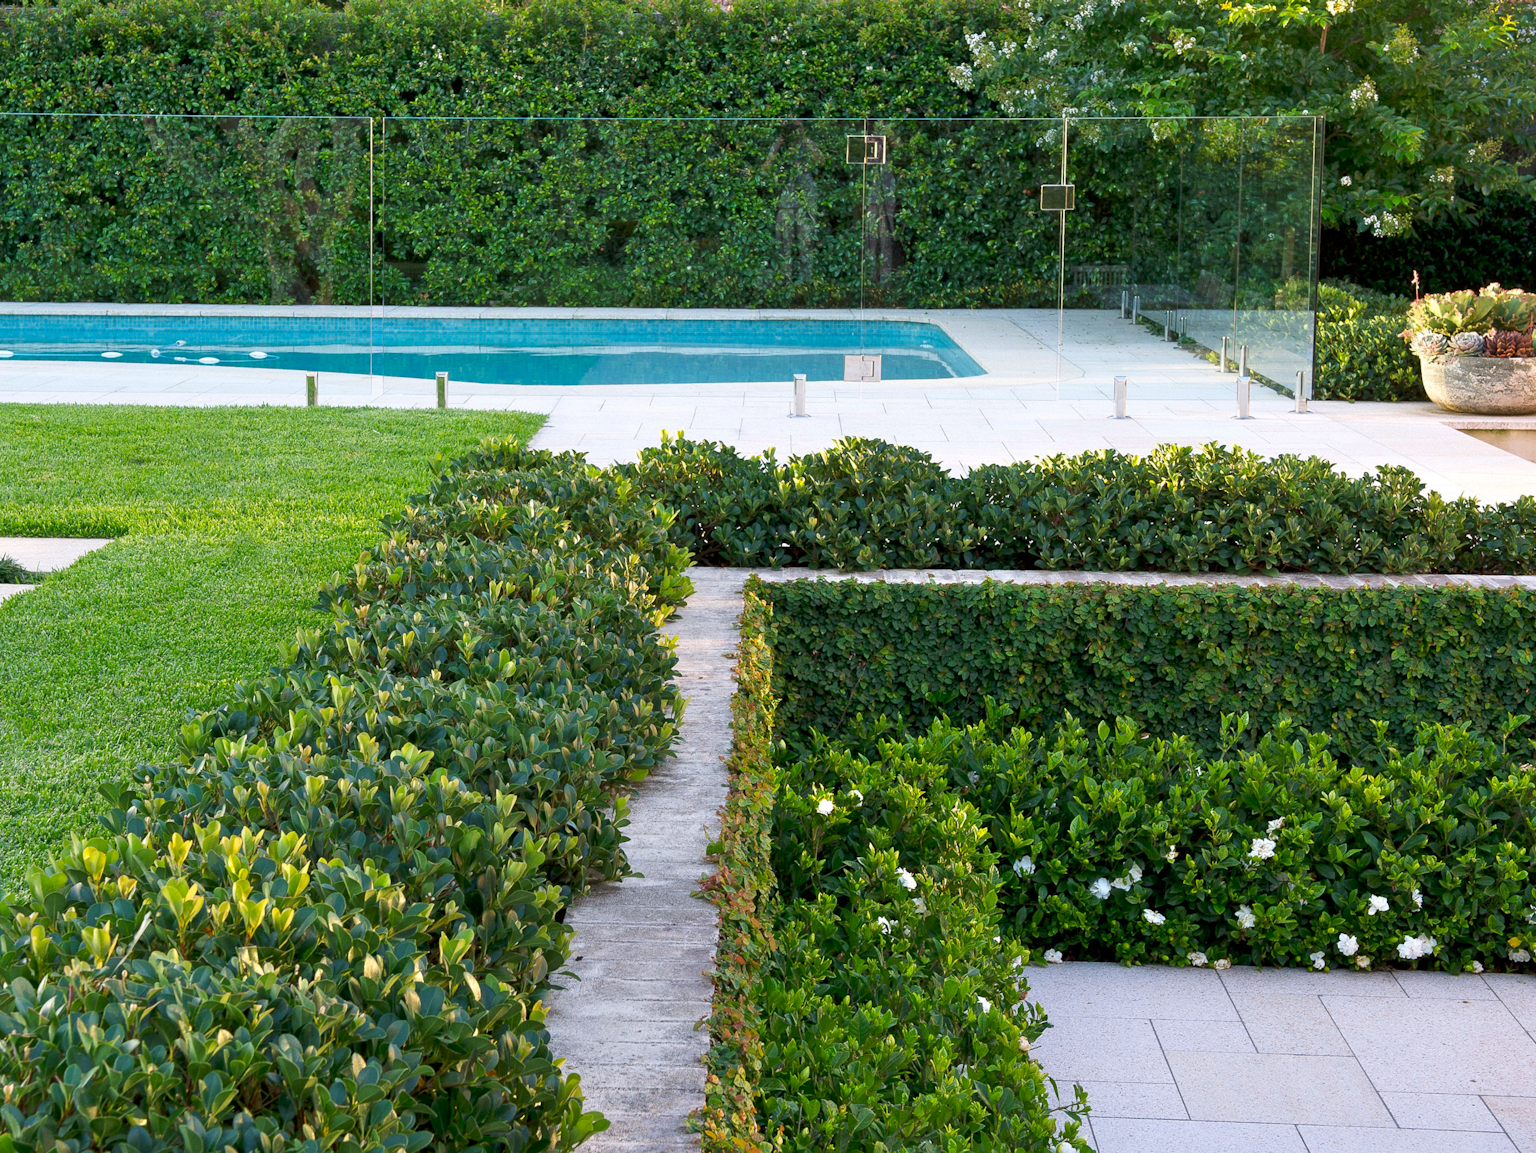 Gardens with low hedging and manicured grass with paved area in Tortoise granite and pool area in background